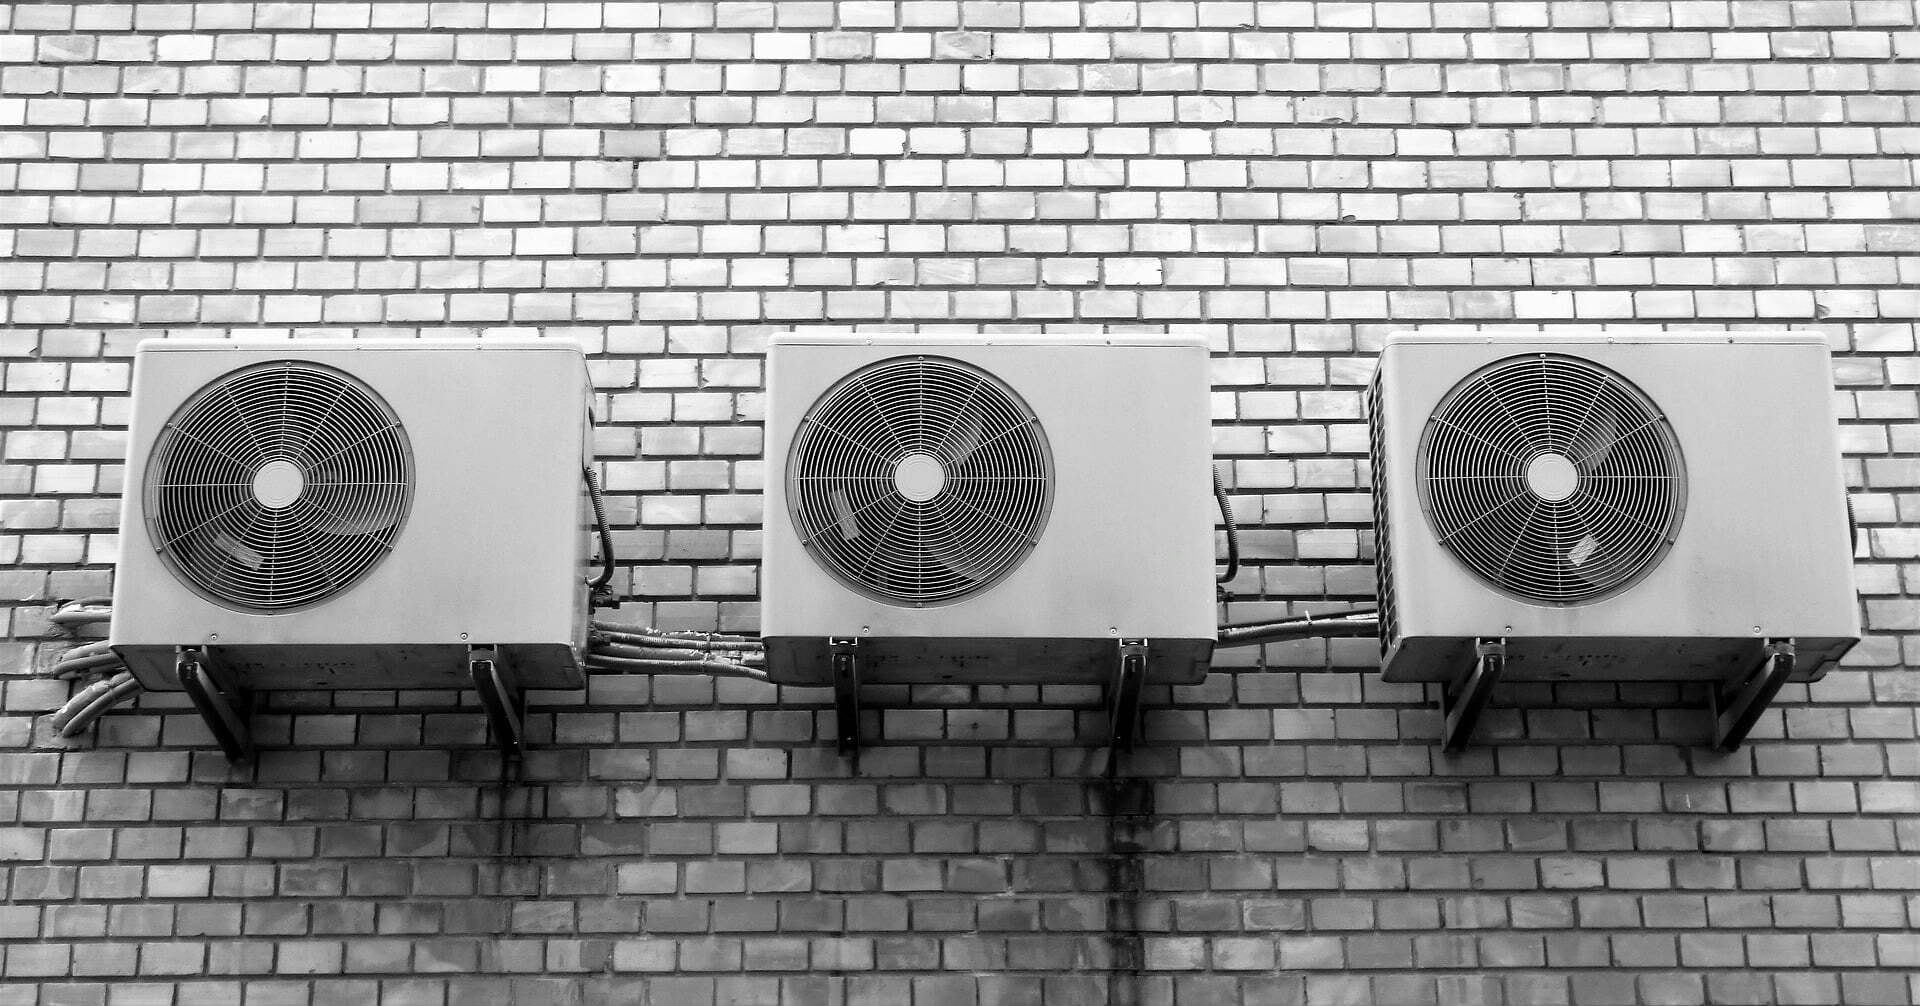 a set of speakers on a brick surface